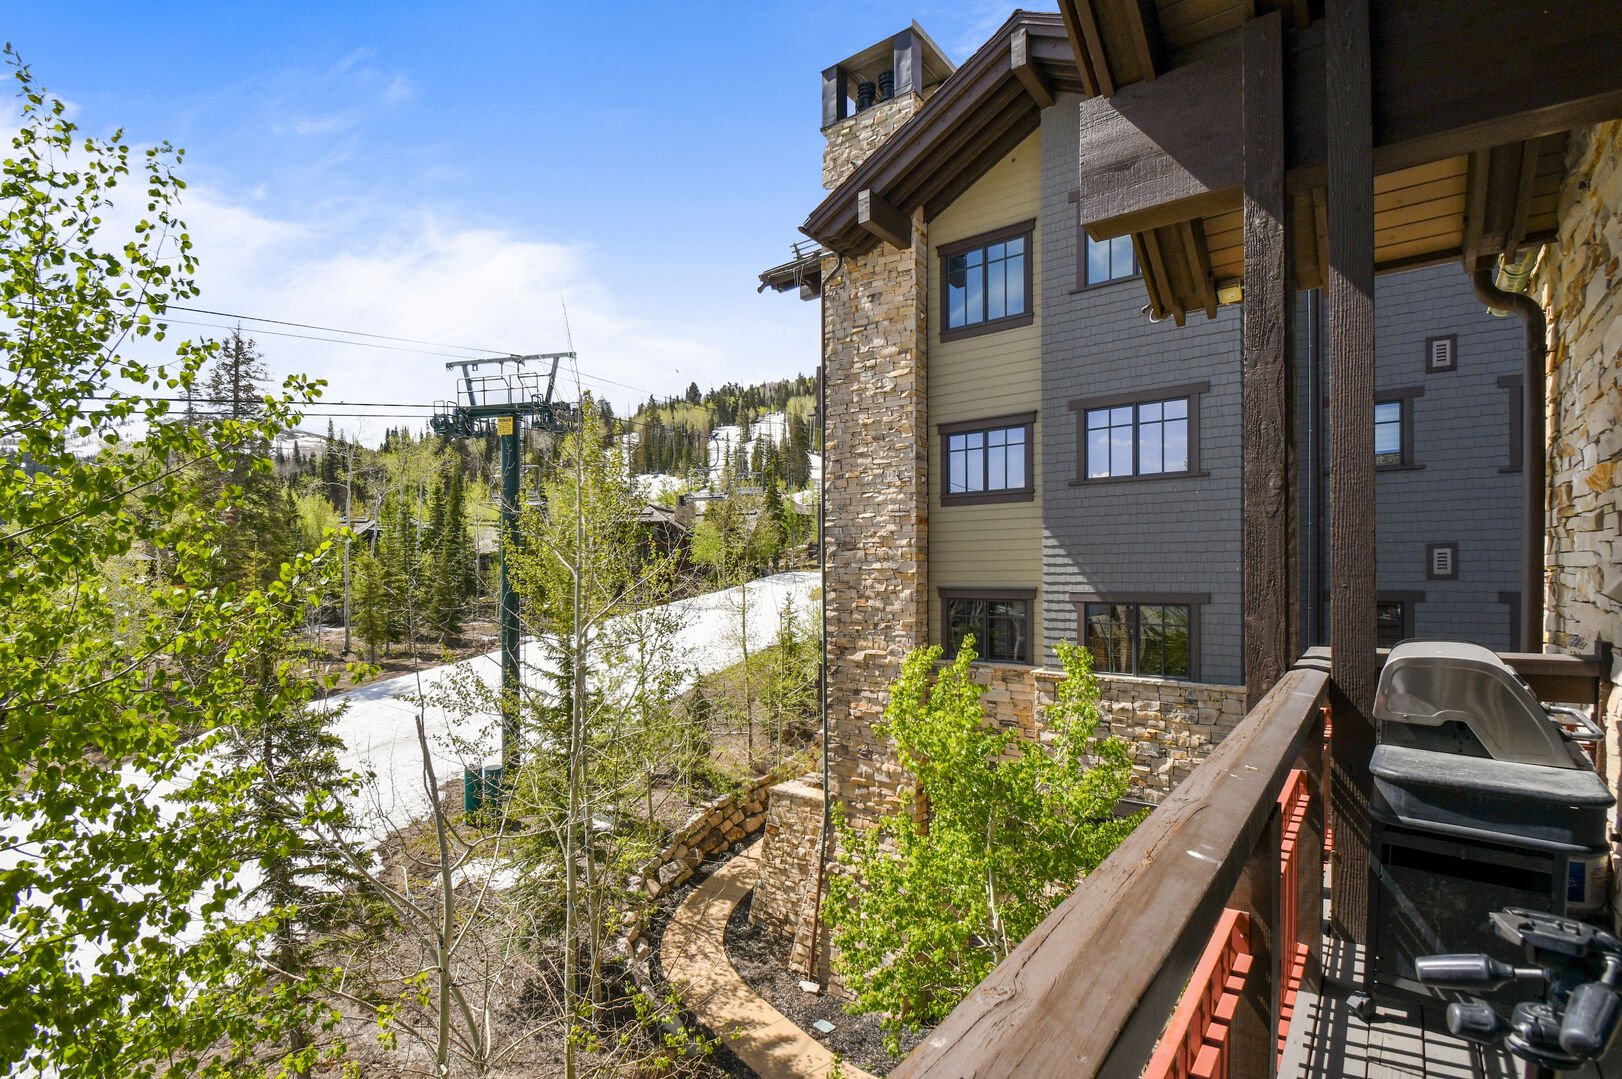 Look out onto the slope from your balcony.